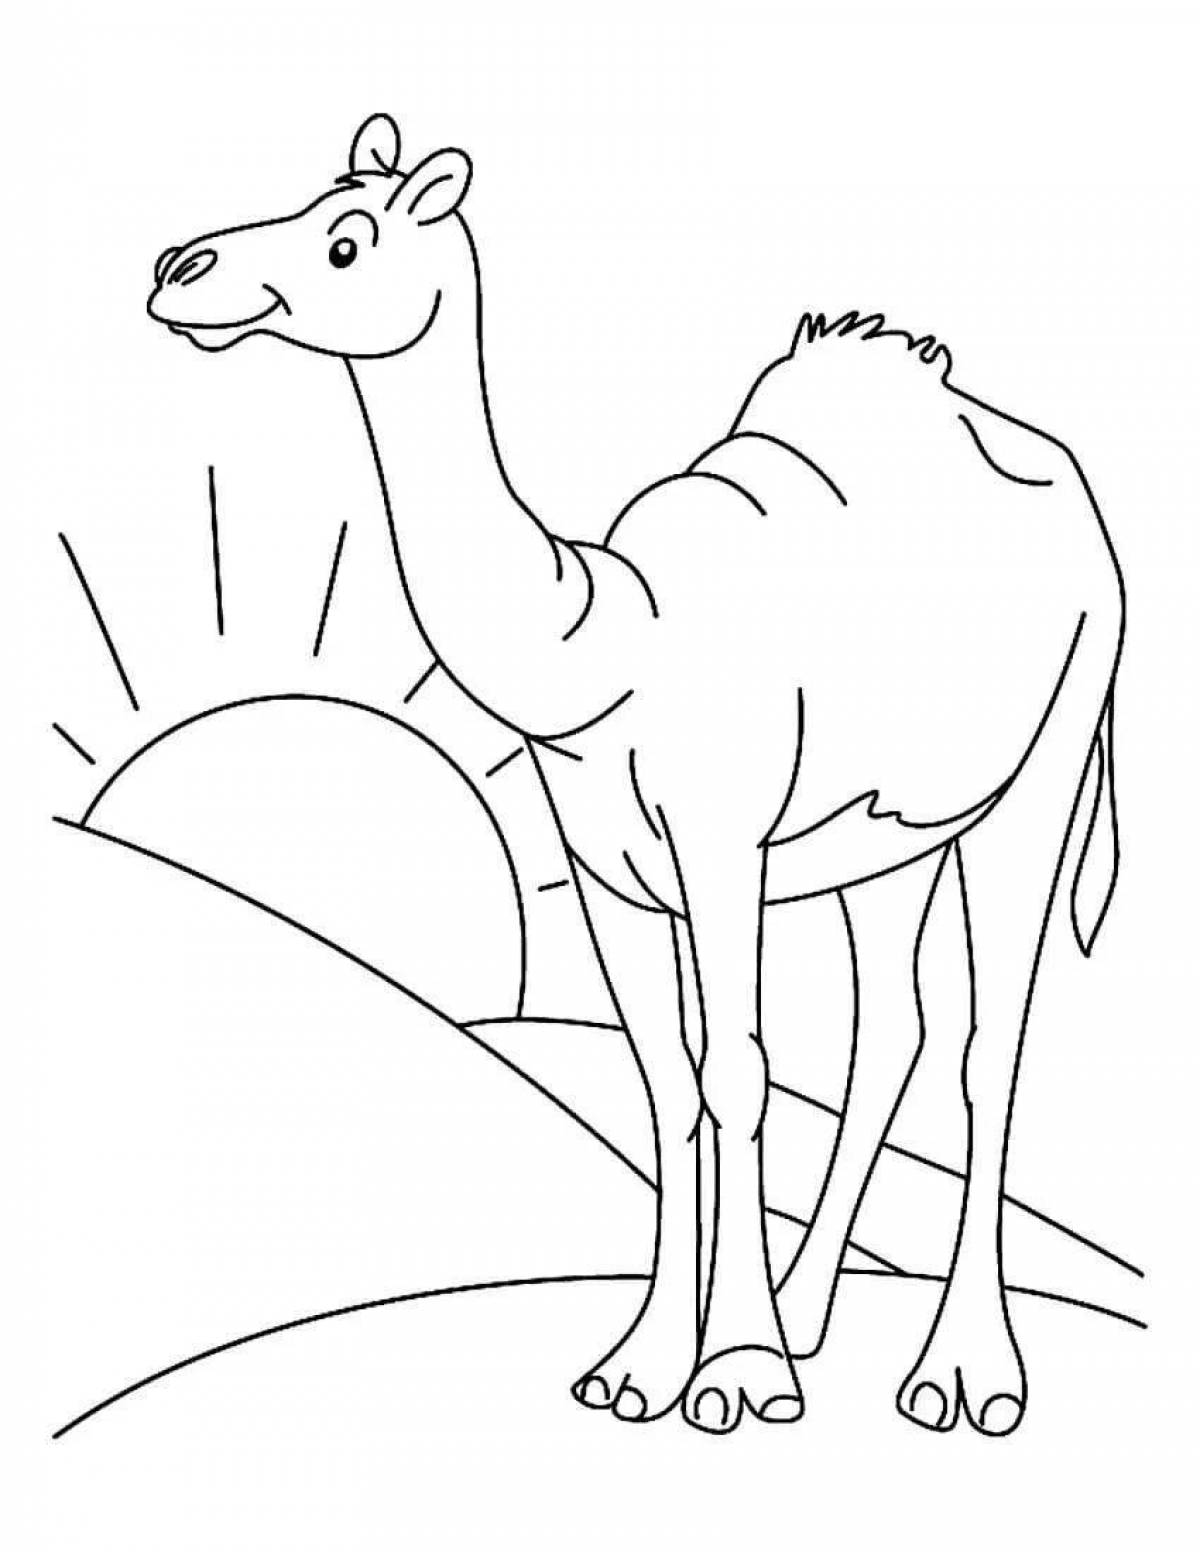 Playful desert coloring page for kids